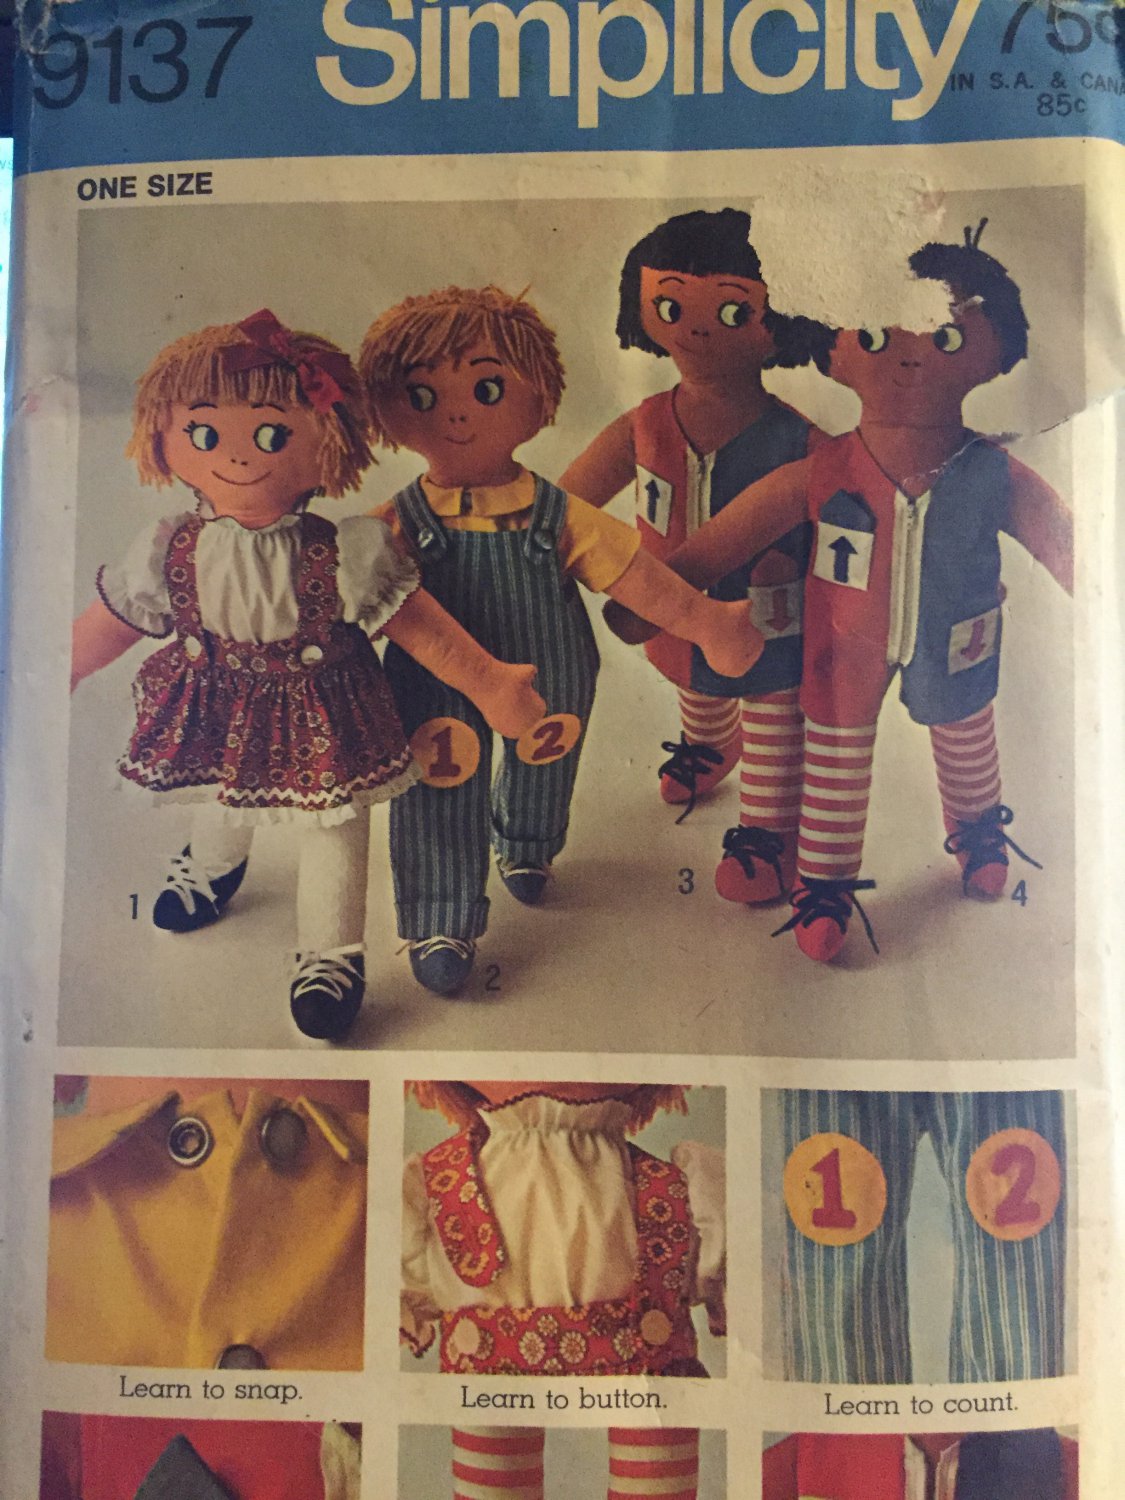 Simplicity 9137 Rag Dolls and Clothes Learn to Snap Button Count Zip Toy Sewing Pattern 24Â¨